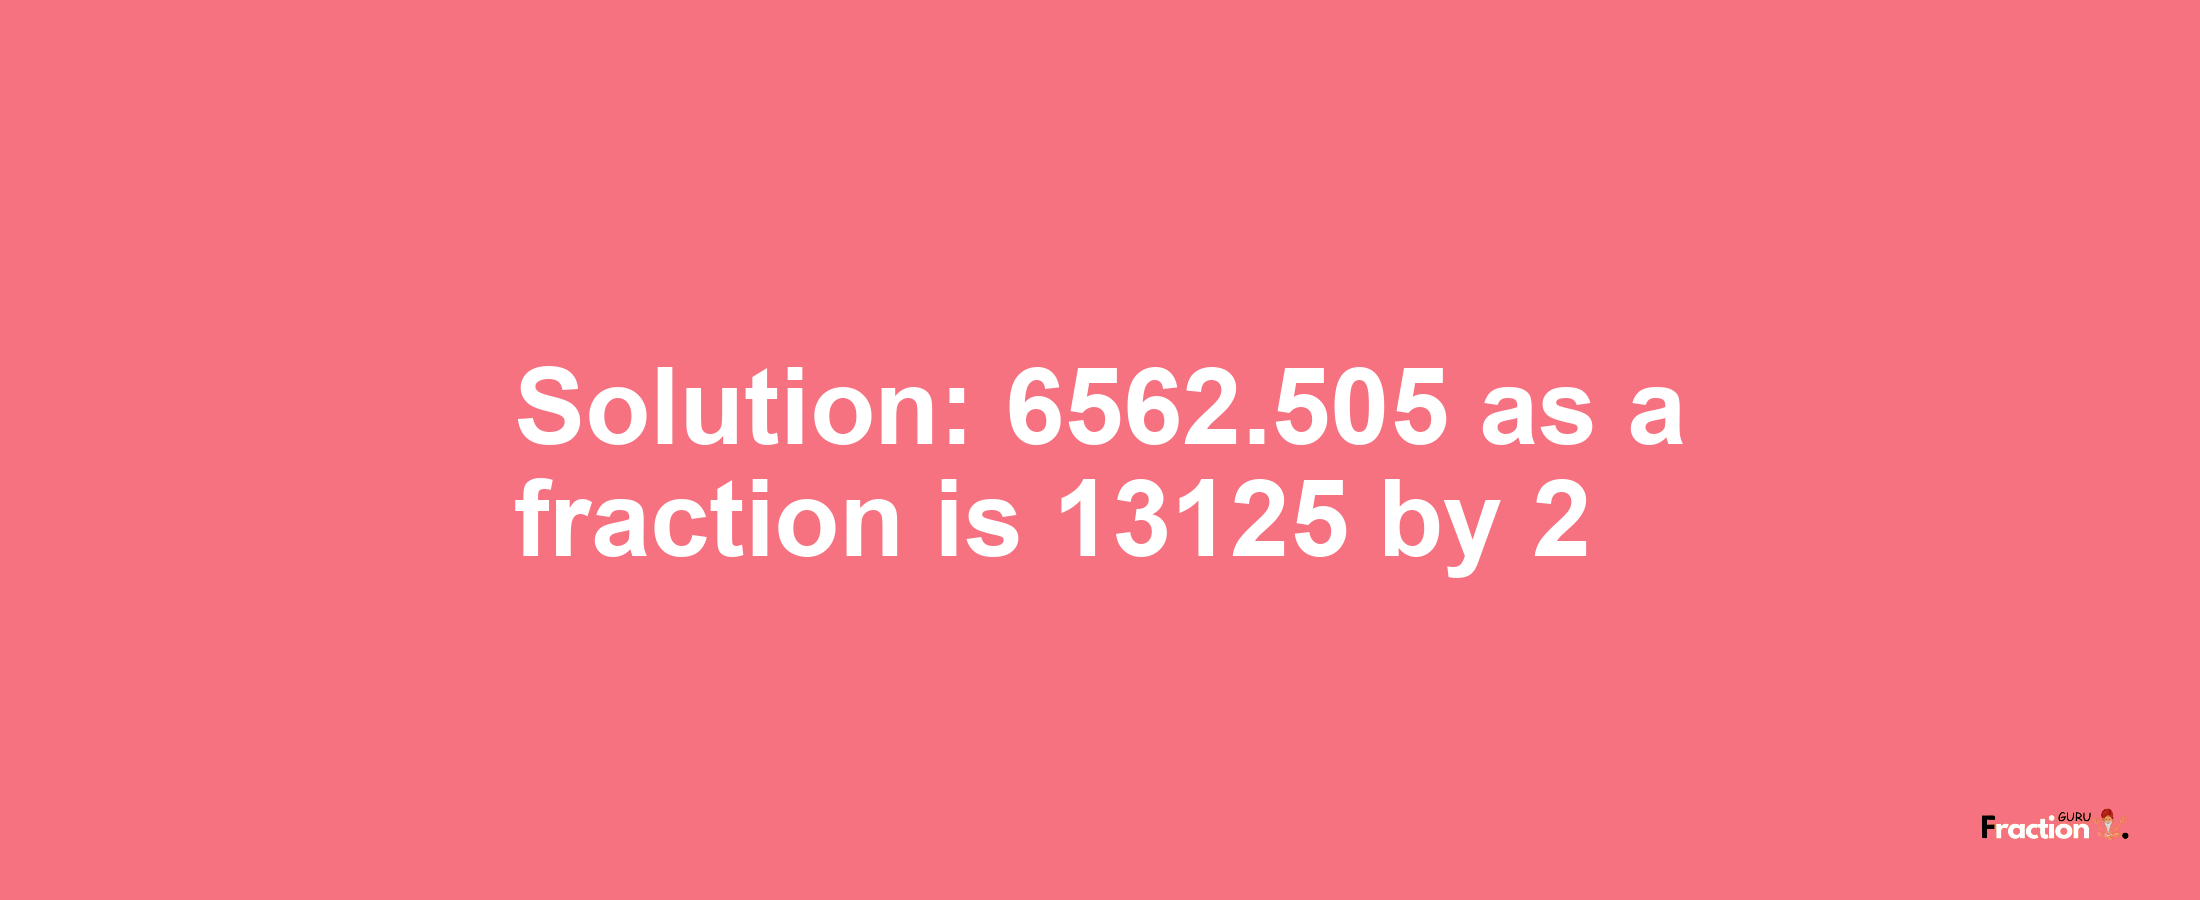 Solution:6562.505 as a fraction is 13125/2